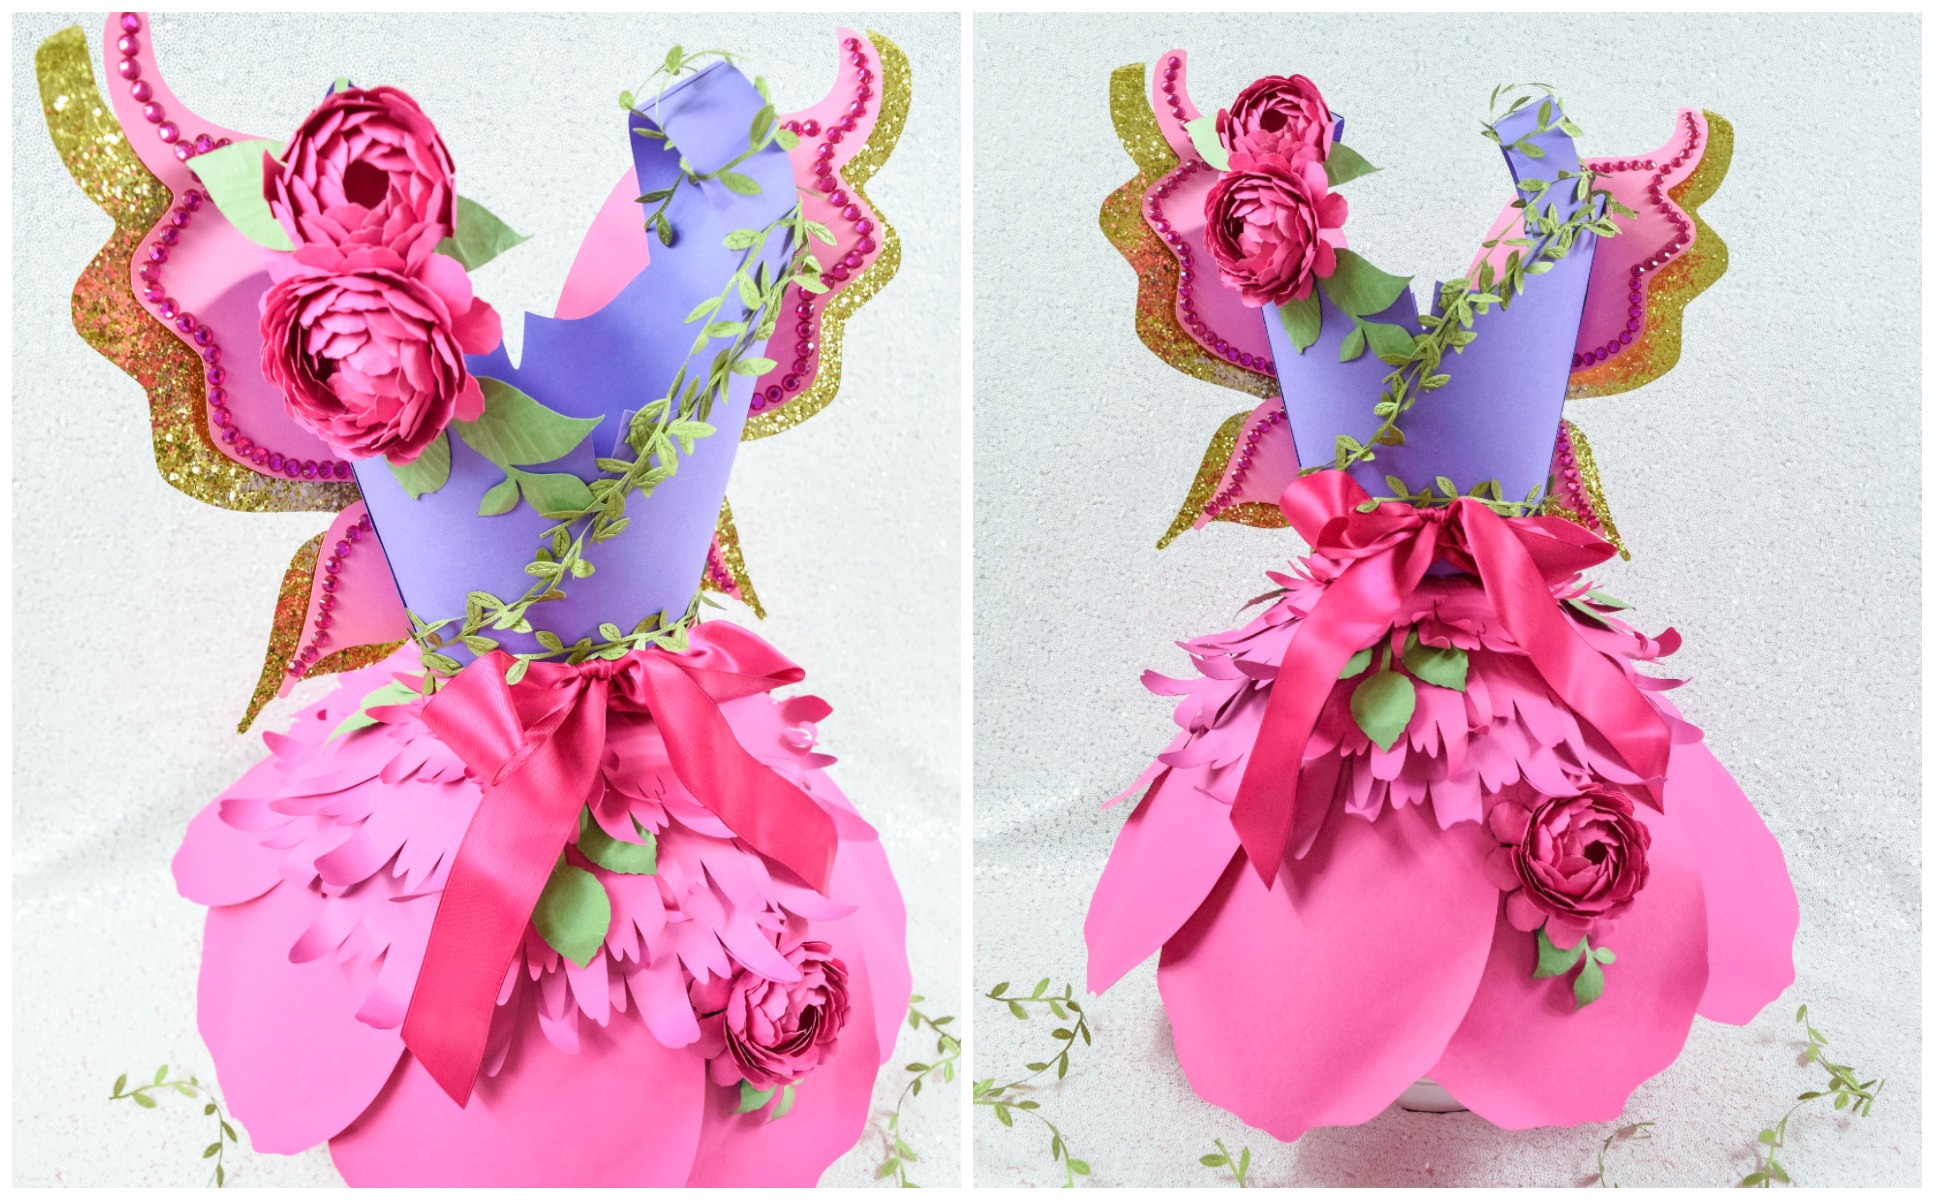 Two side by side images of a fairy themed paper dress, made with pink, blue, and gold paper and decorated with pink paper flowers.